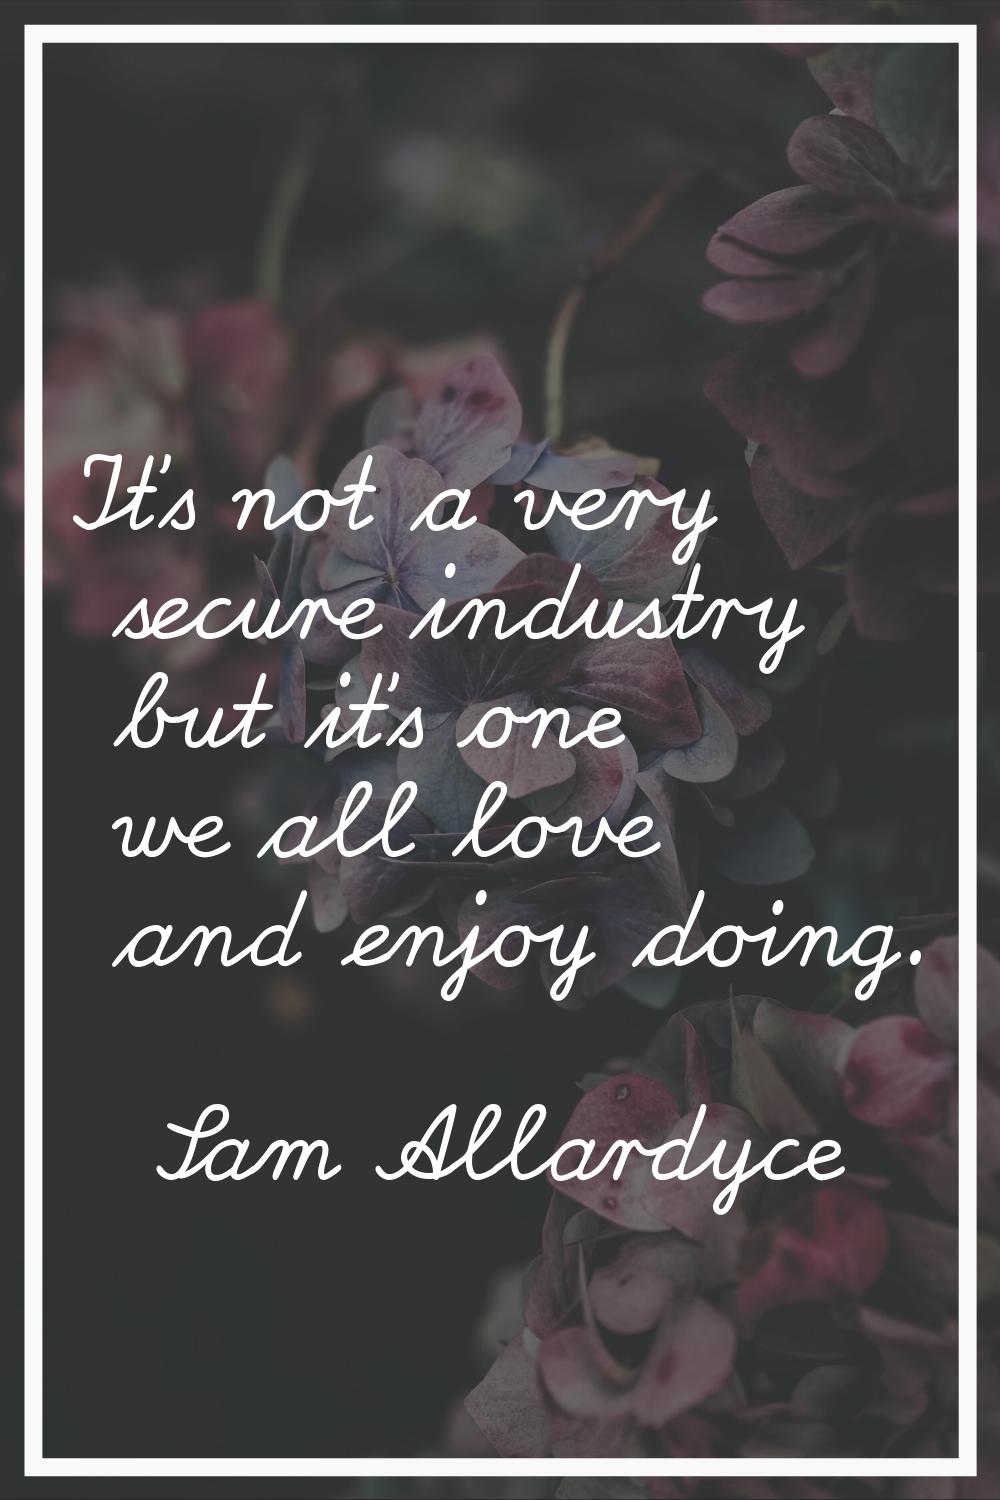 It's not a very secure industry but it's one we all love and enjoy doing.